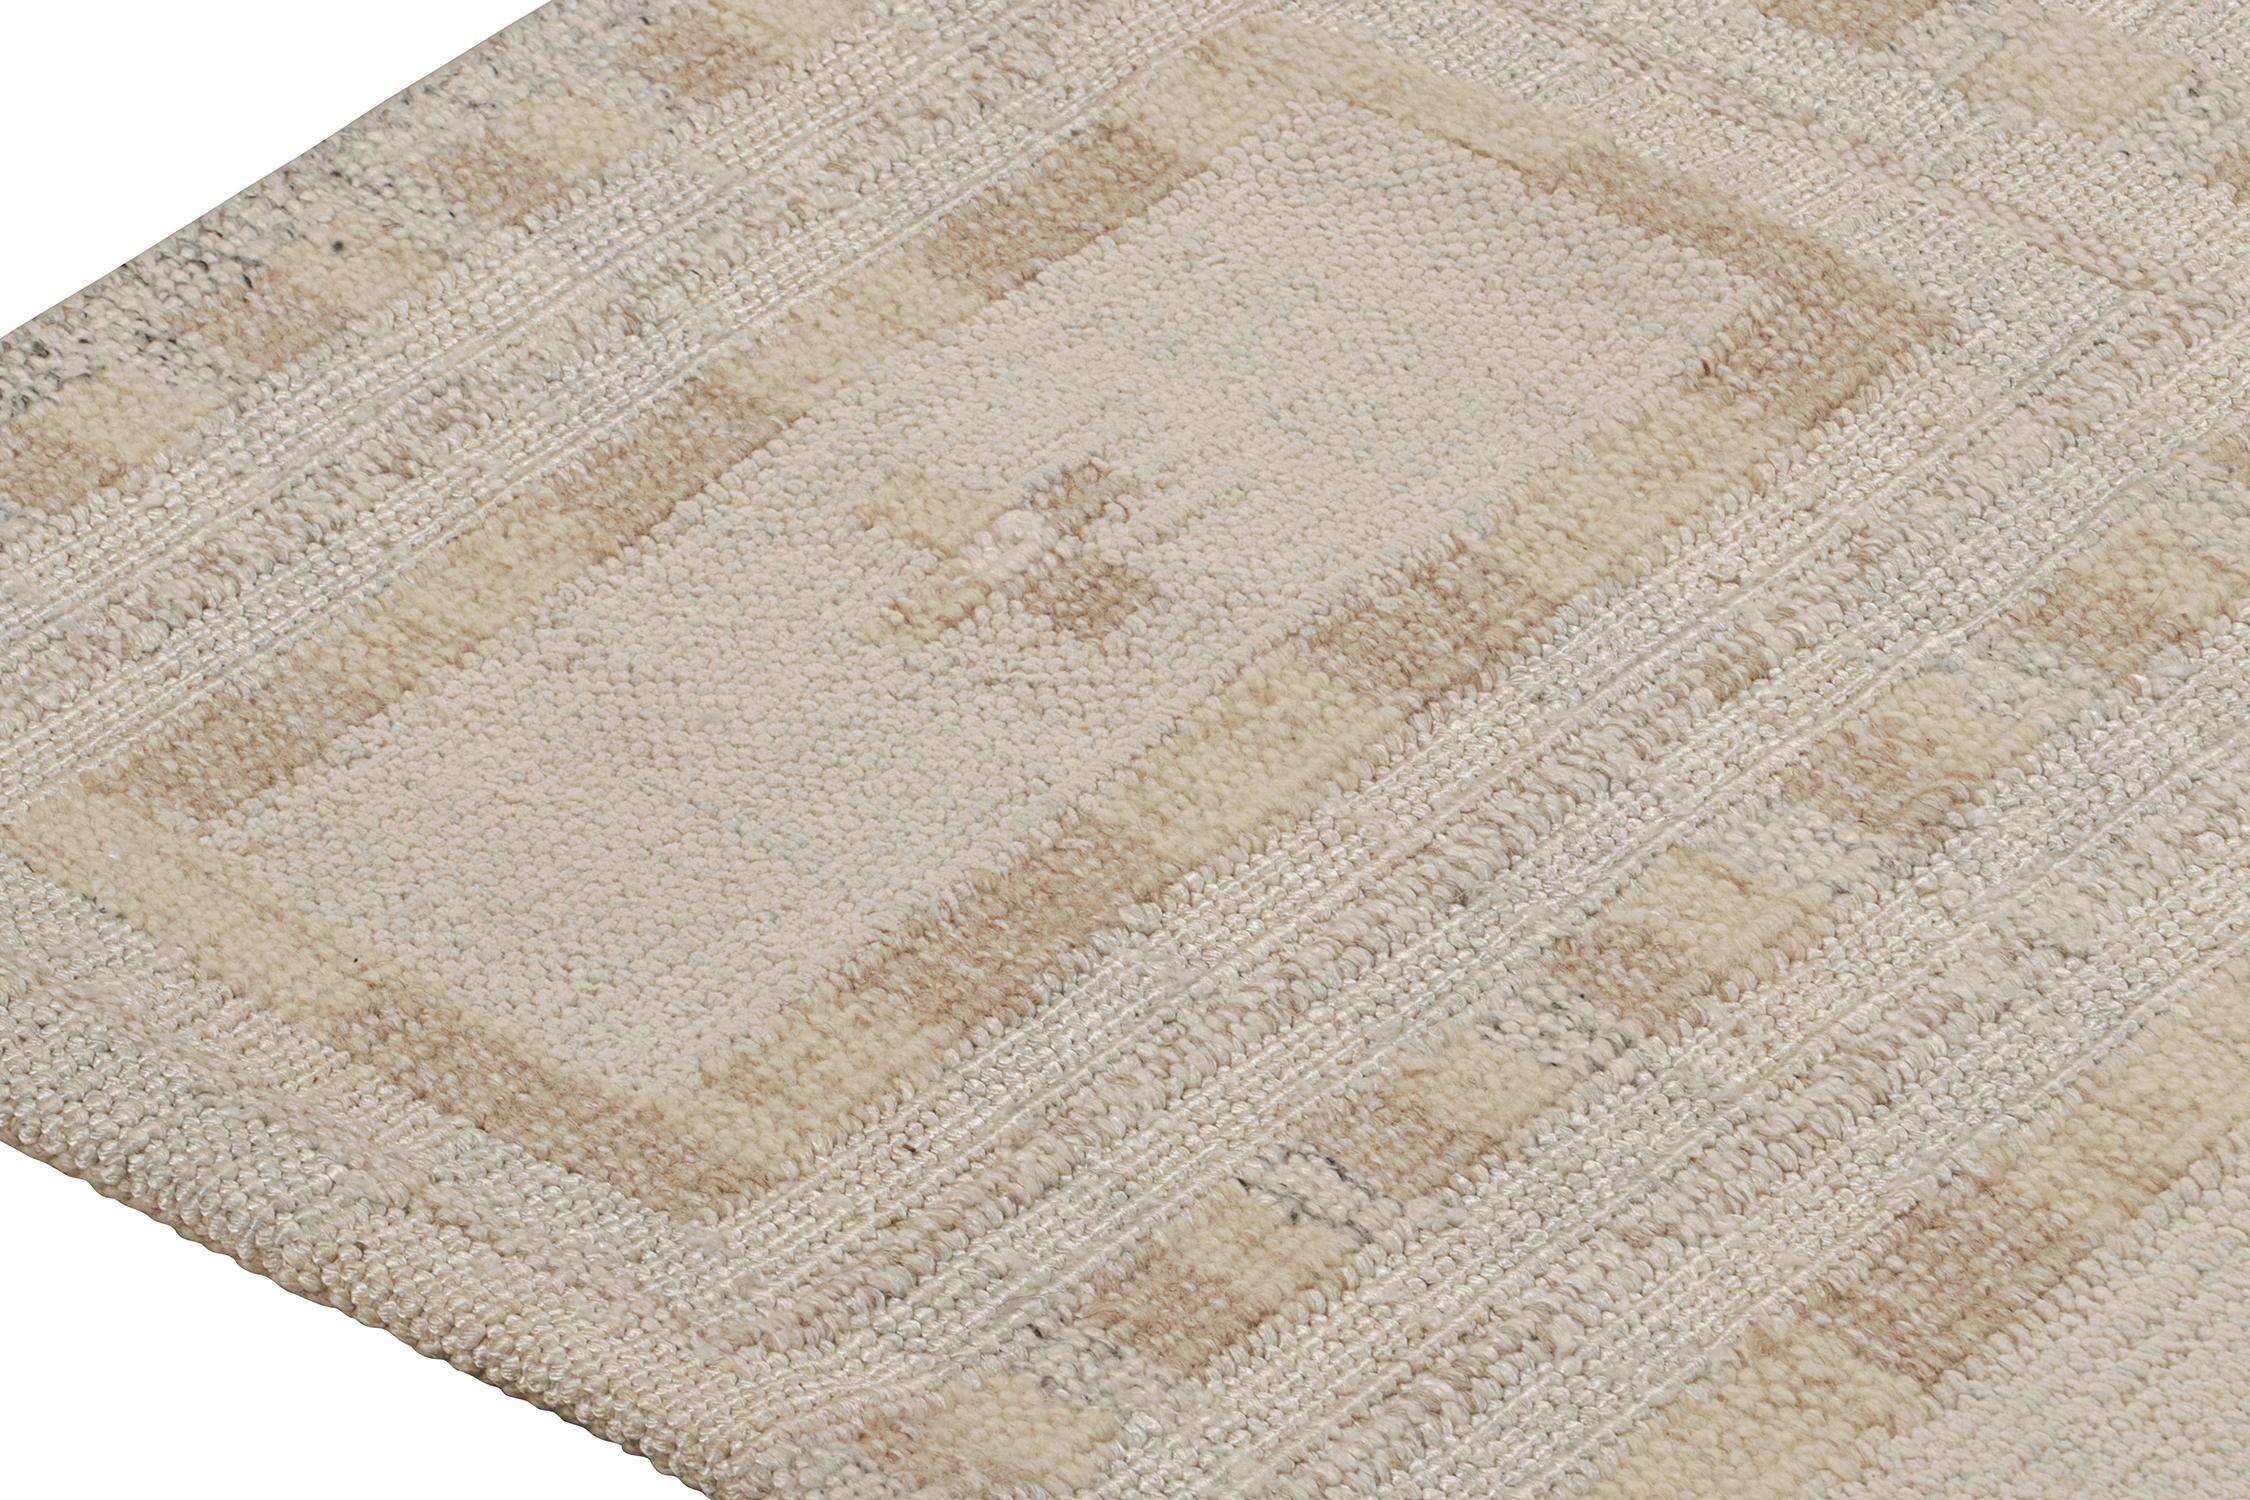 Indian Rug & Kilim’s Scandinavian Style Kilim in White with Beige Geometric Patterns For Sale